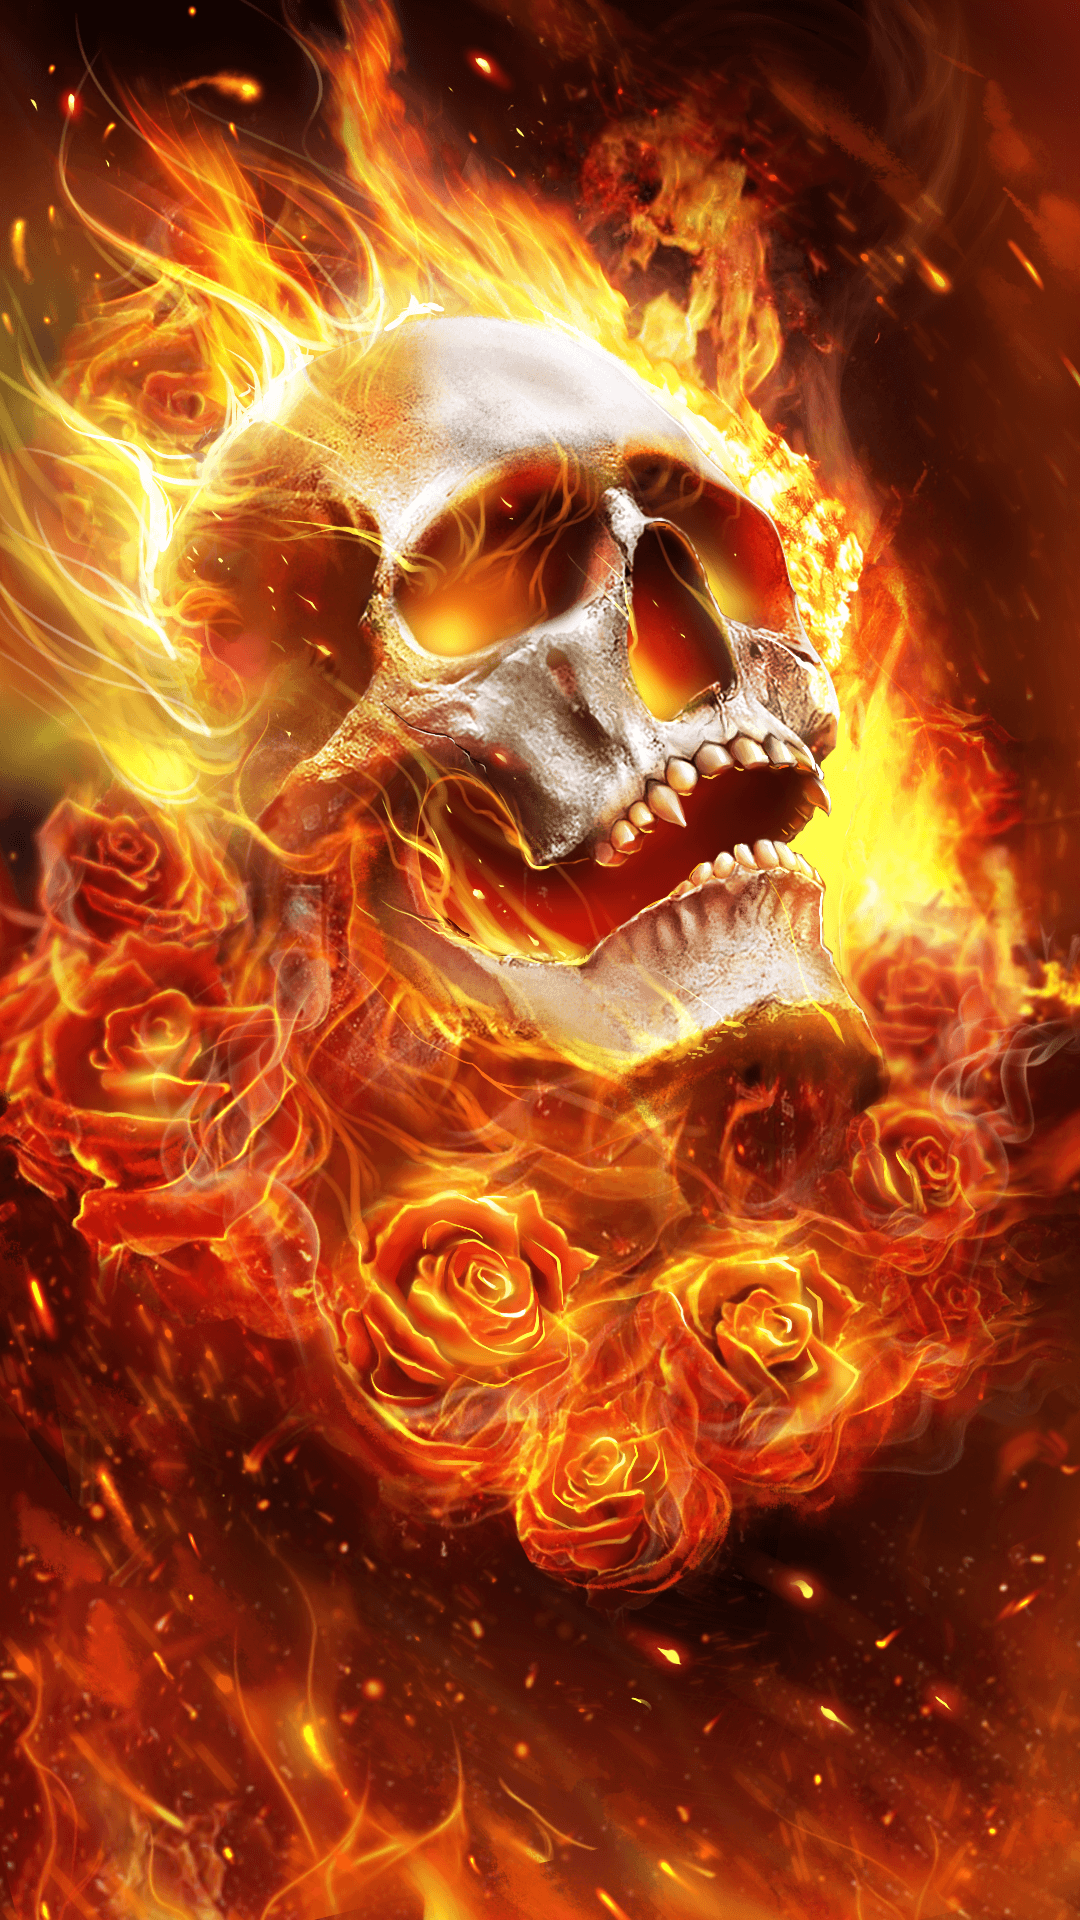 Flame skull with roses! Beautiful live wallpaper. Android live